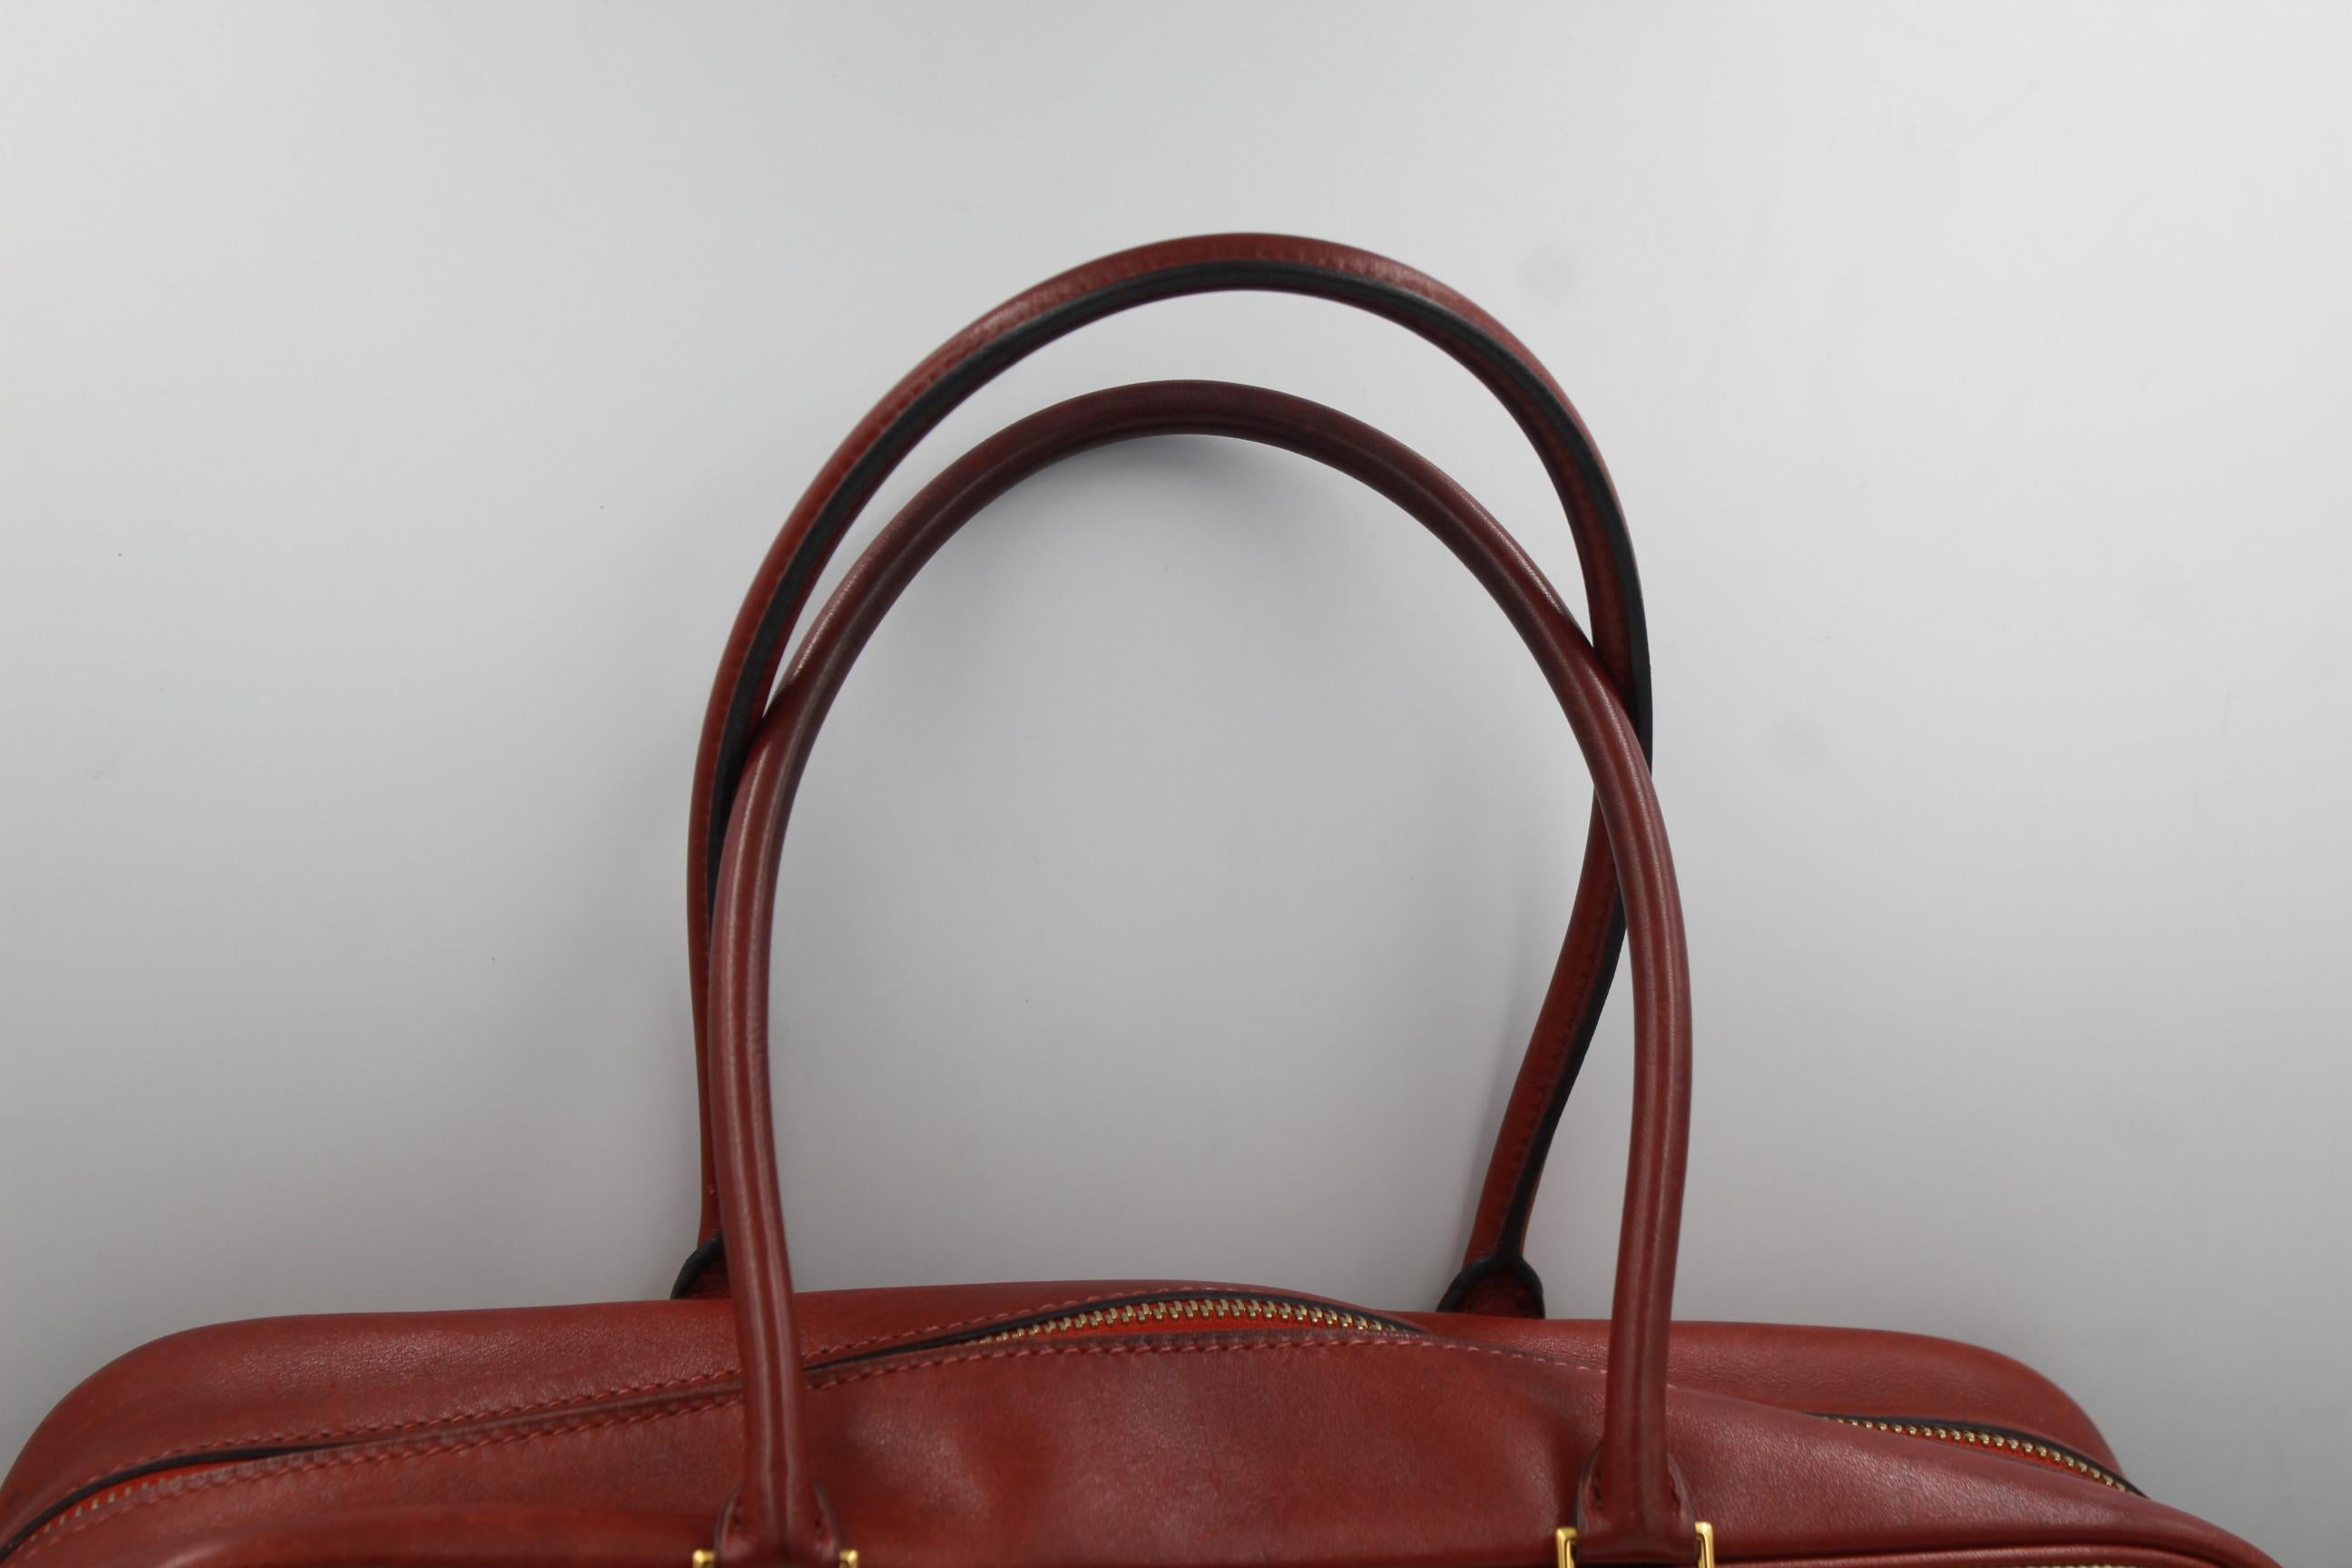 Gray Hermes Plume 32 in Dark Red Leather and Canvas